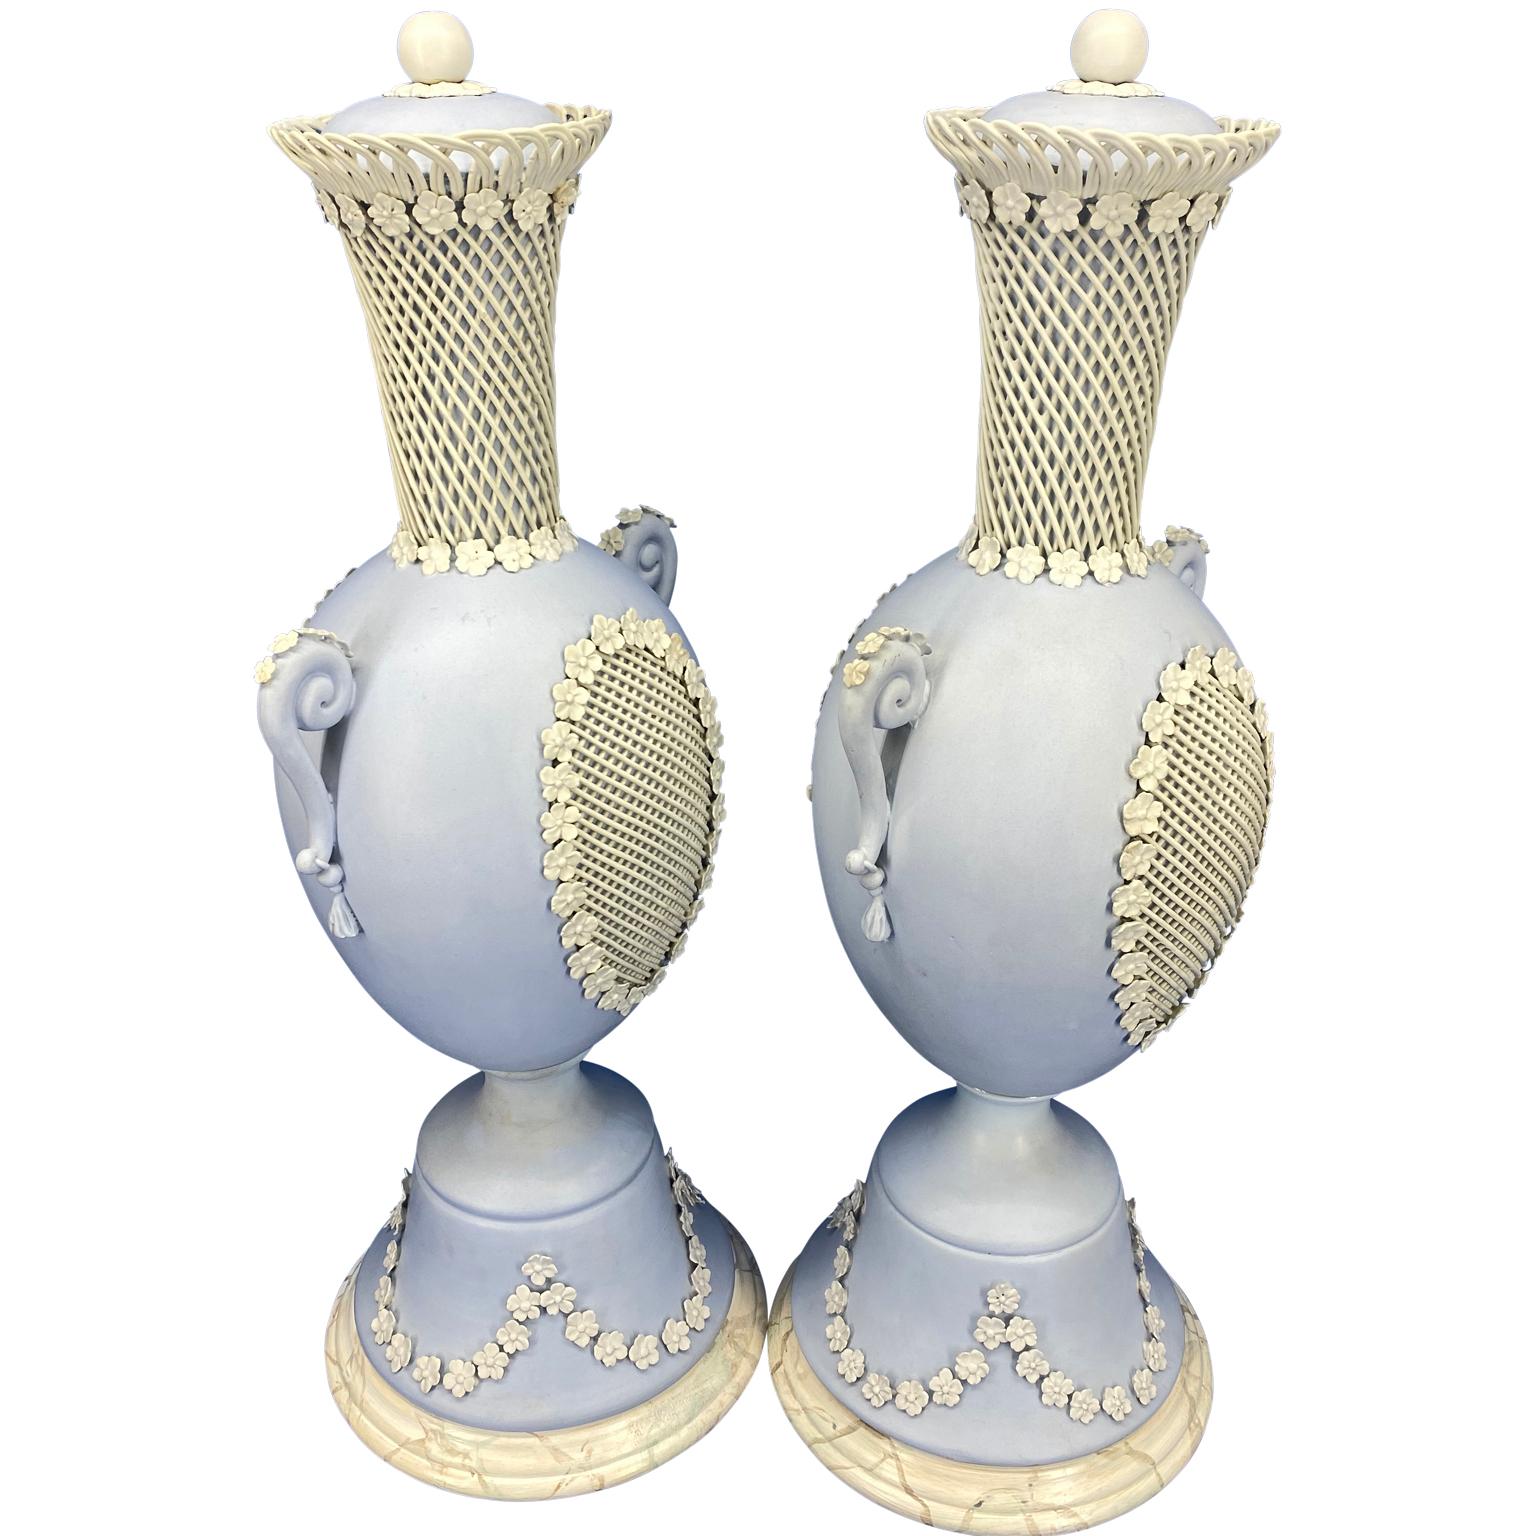 Neoclassical Pair Of Light Blue Jasper Wedgwood Urns and Covers, England, Late 19th Century